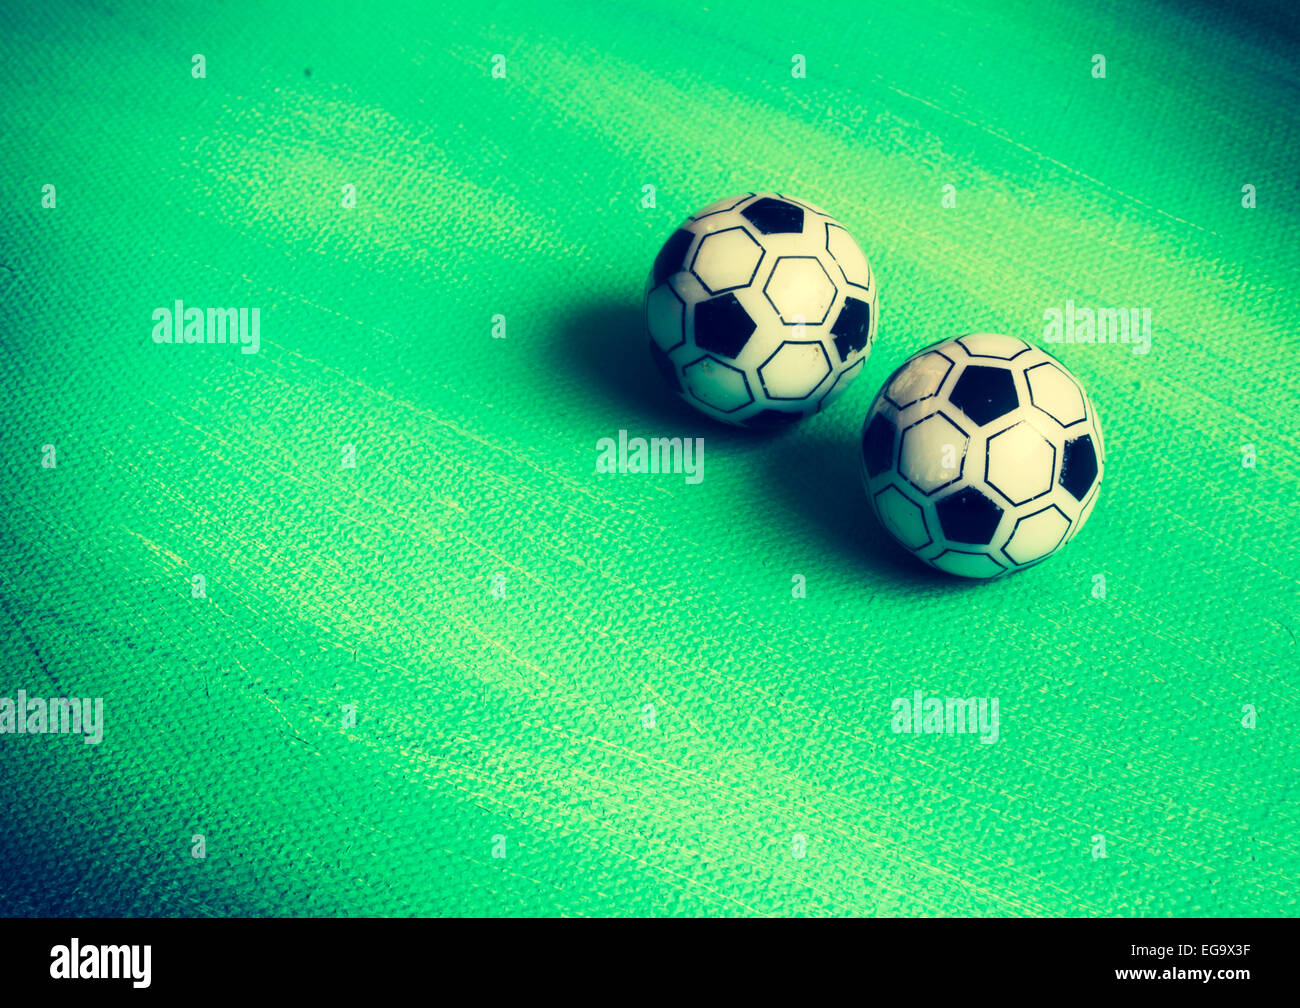 Two soccer toy balls on green canvas for grass, playful background. Stock Photo